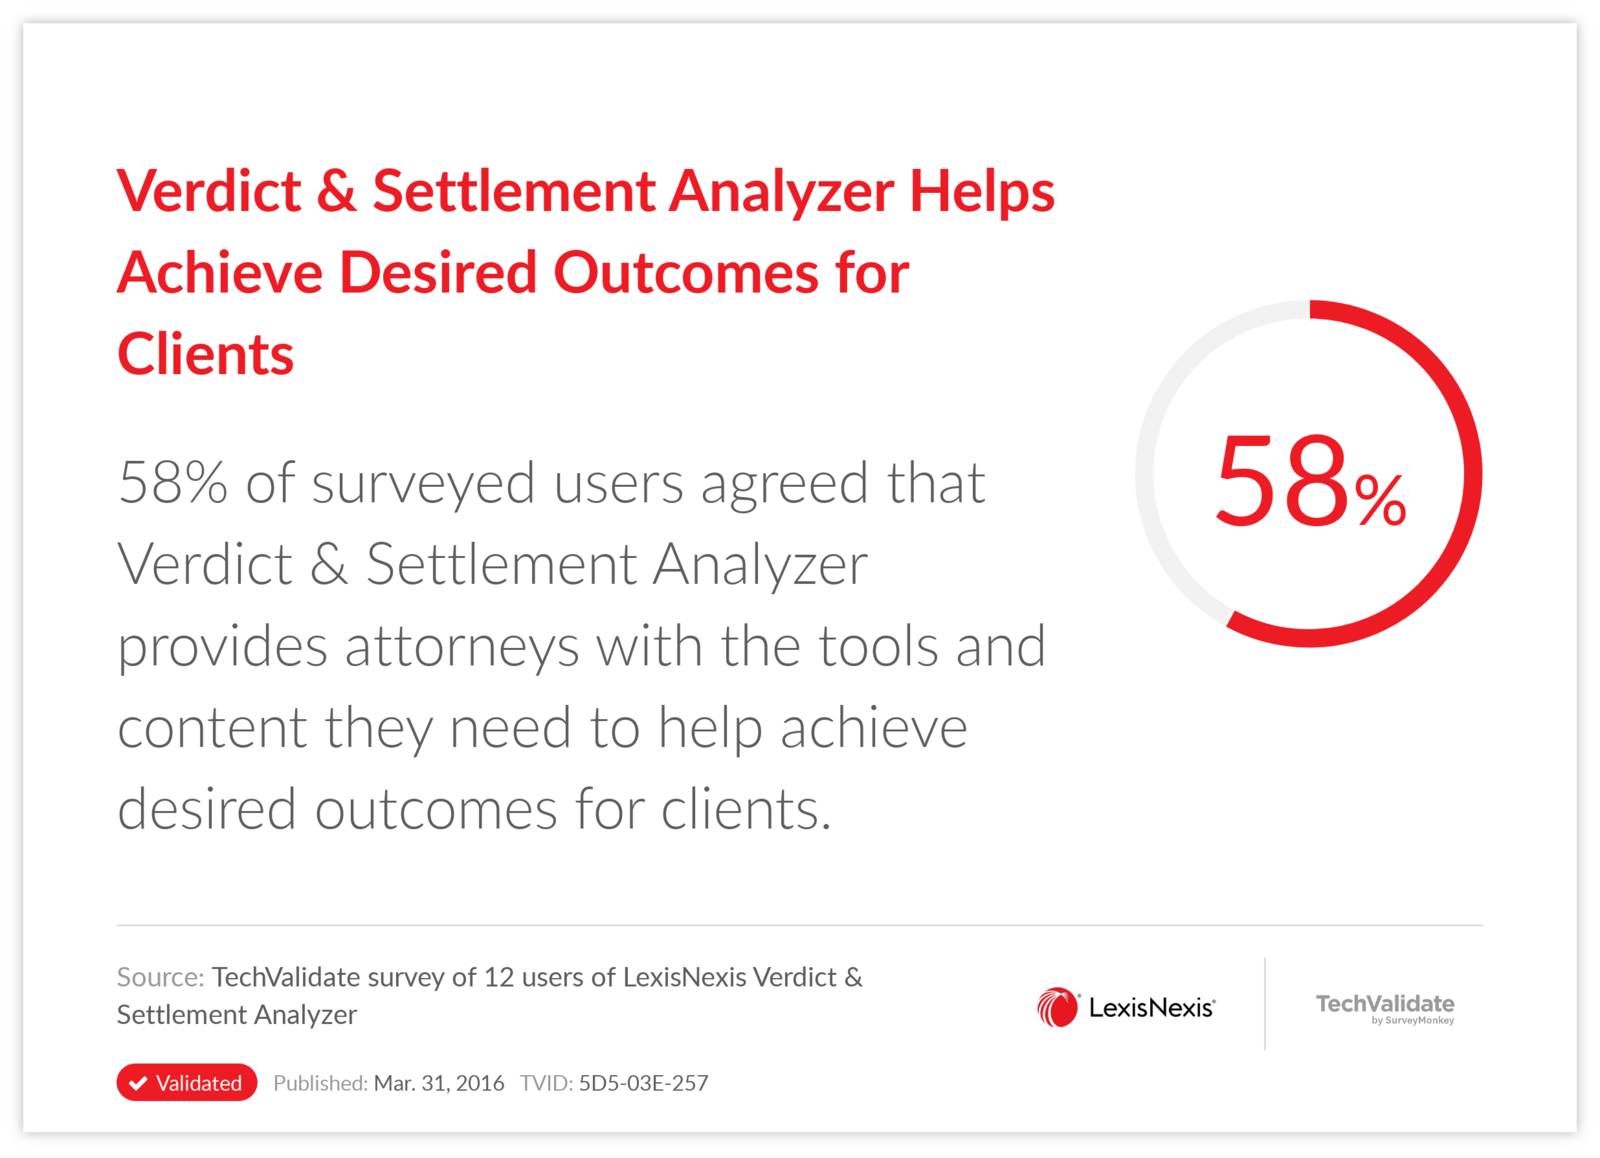 Verdict & Settlement Analyzer Helps Achieve Desired Outcomes for Clients